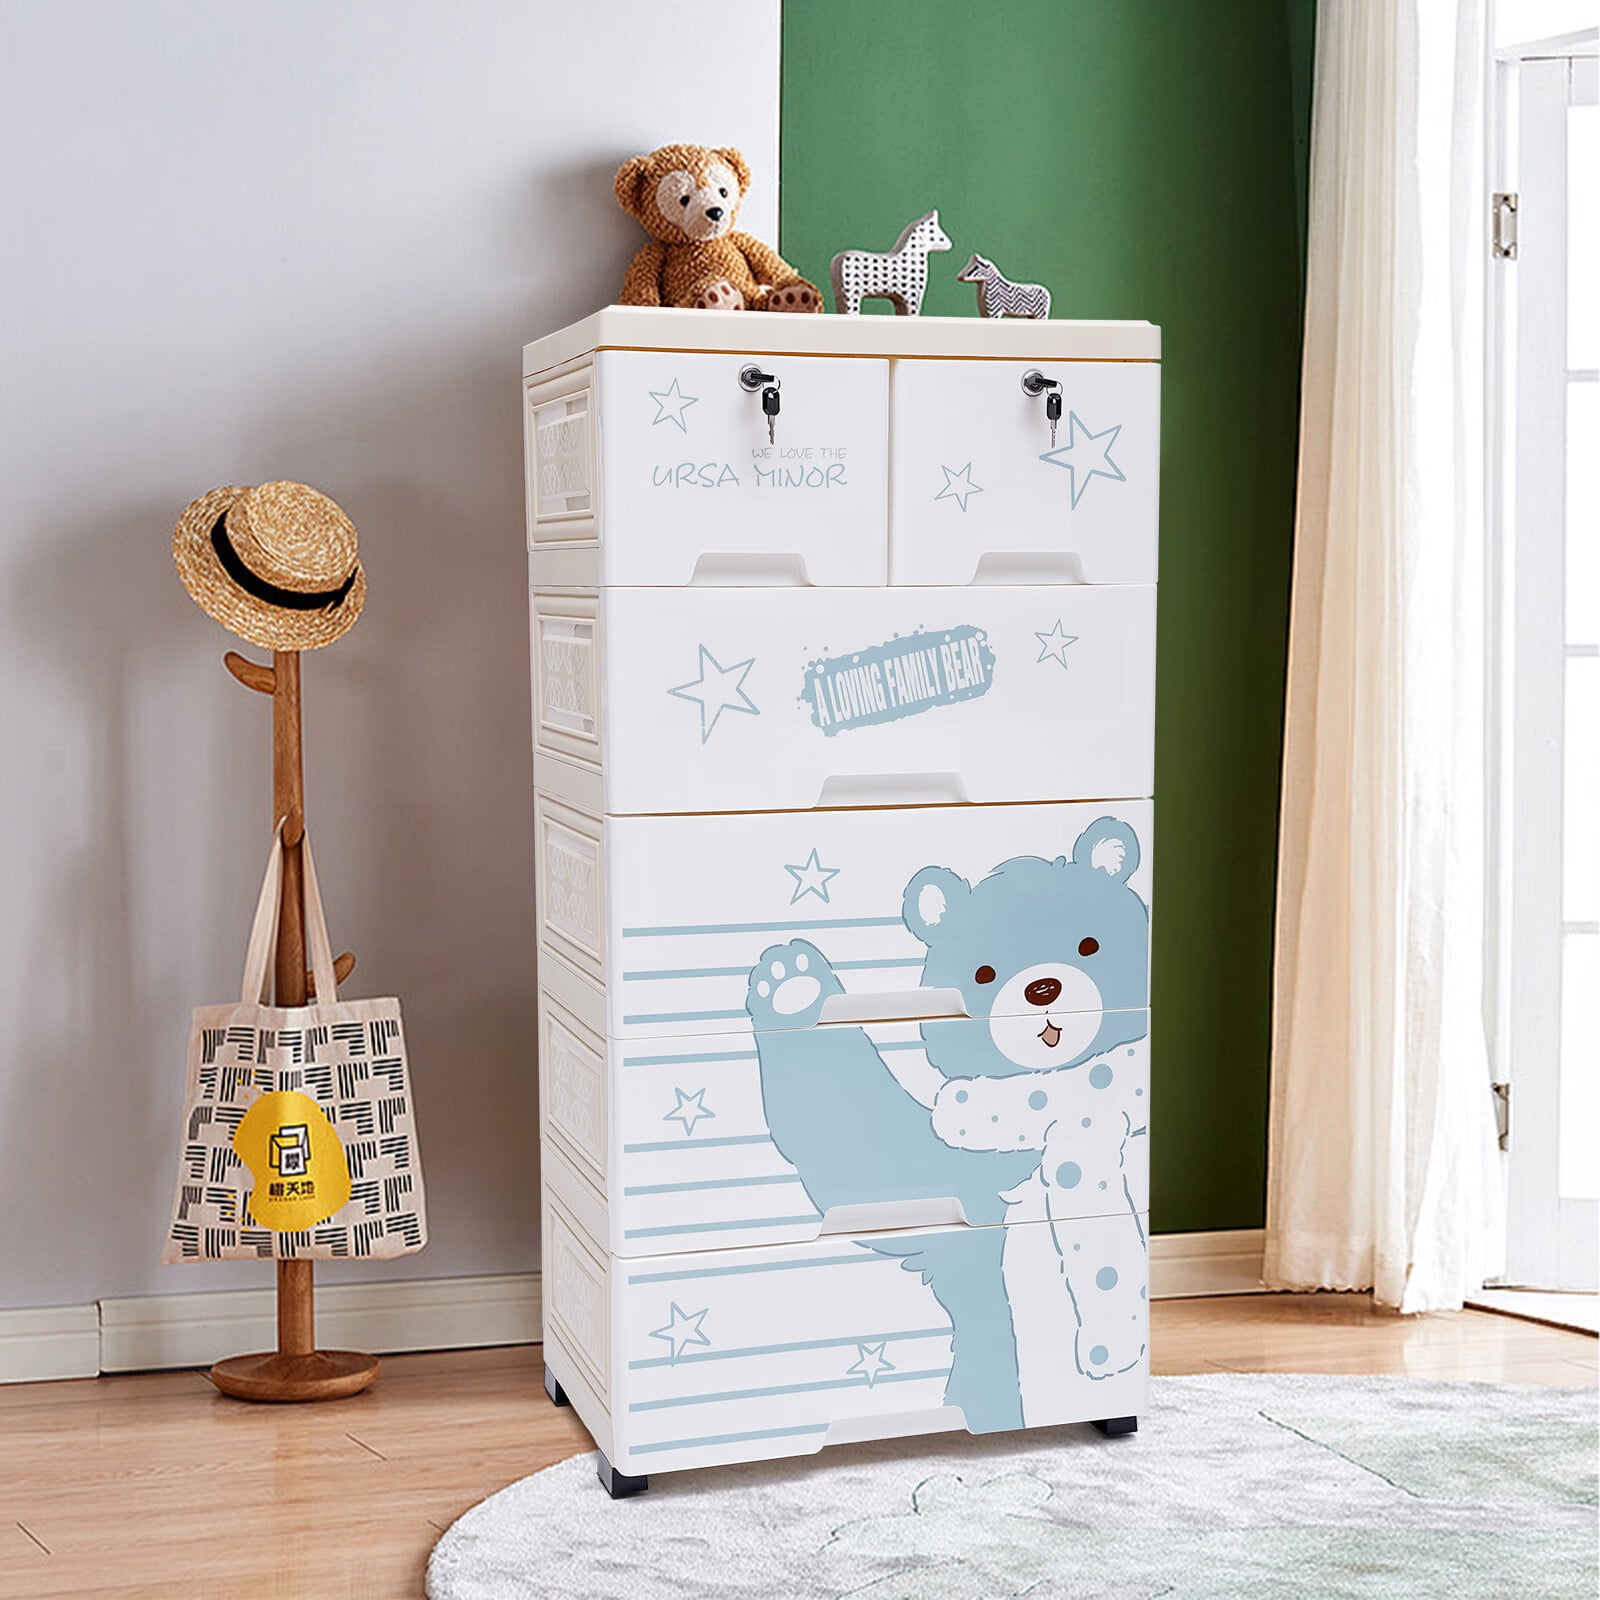 Storage Cabinet with 6 Drawers Tall Dresser Movable Plastic Organizer with  Wheels and Locks for Clothes Toys Books, Playroom Bedroom Furniture Beige 